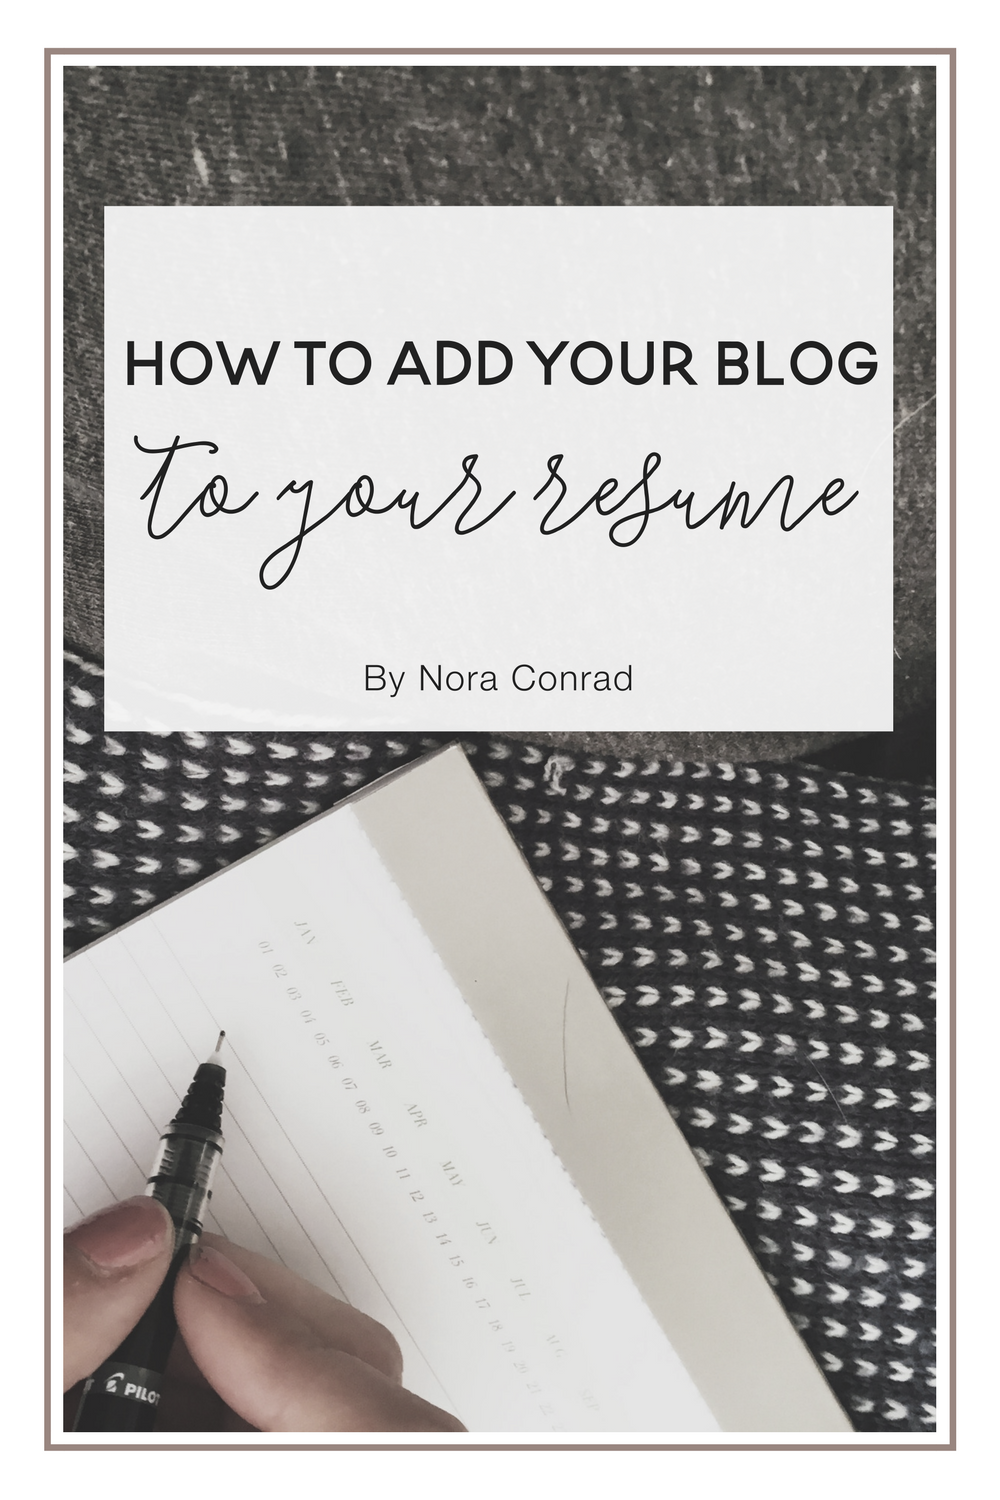 If you've been working on your blog or website for over 6 months, you should add it to your resume right now. In this post, I'll explain how to do it.